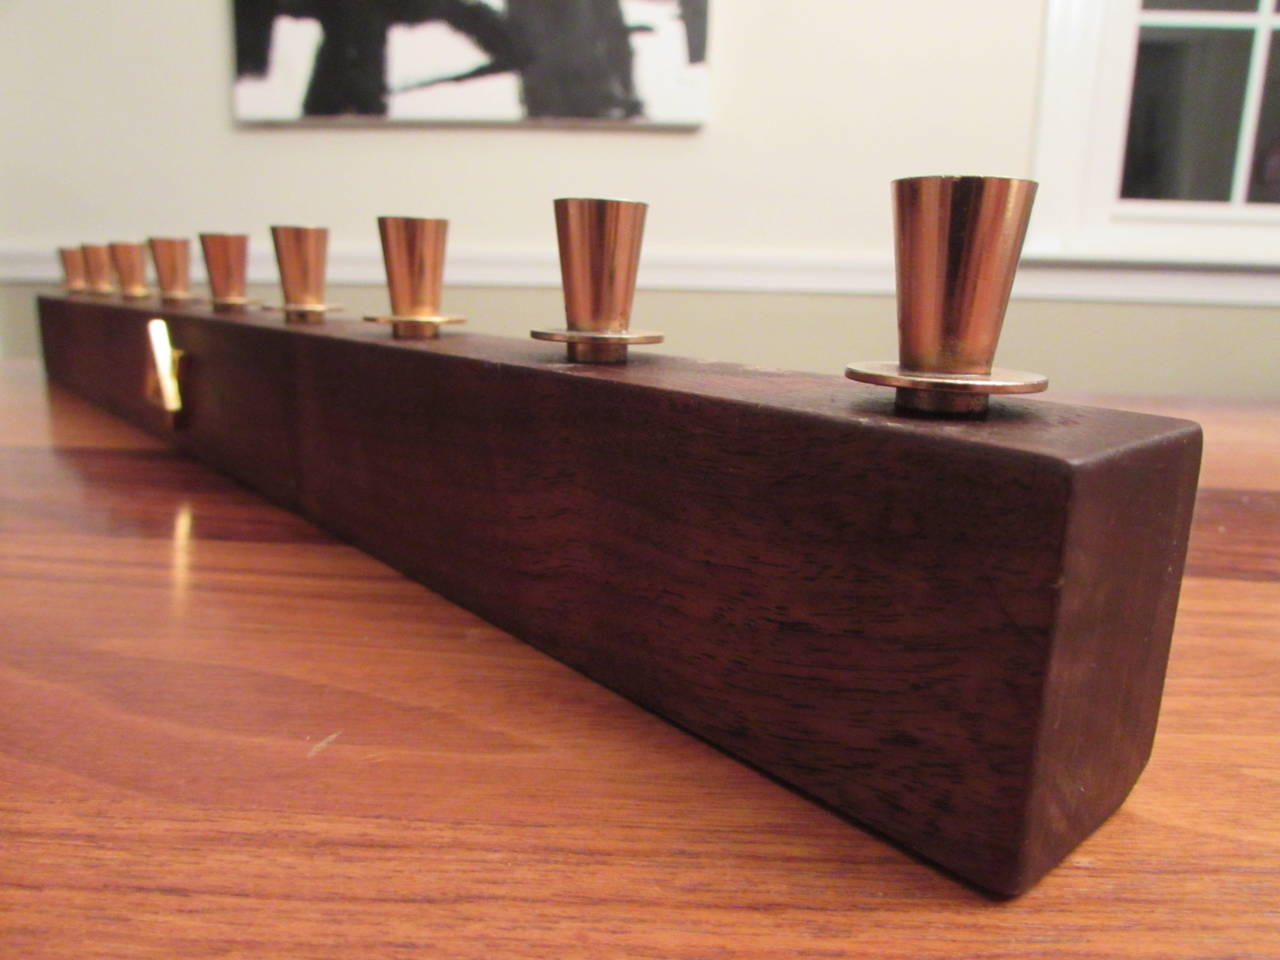 Black walnut and brass menorah designed by Paul Evans for Raymor in 1955 and produced until 1959. This design has been confirmed by Evans' studio assistant, Dorsey Reading, and is documented (see pics). There were five models in the series--this is